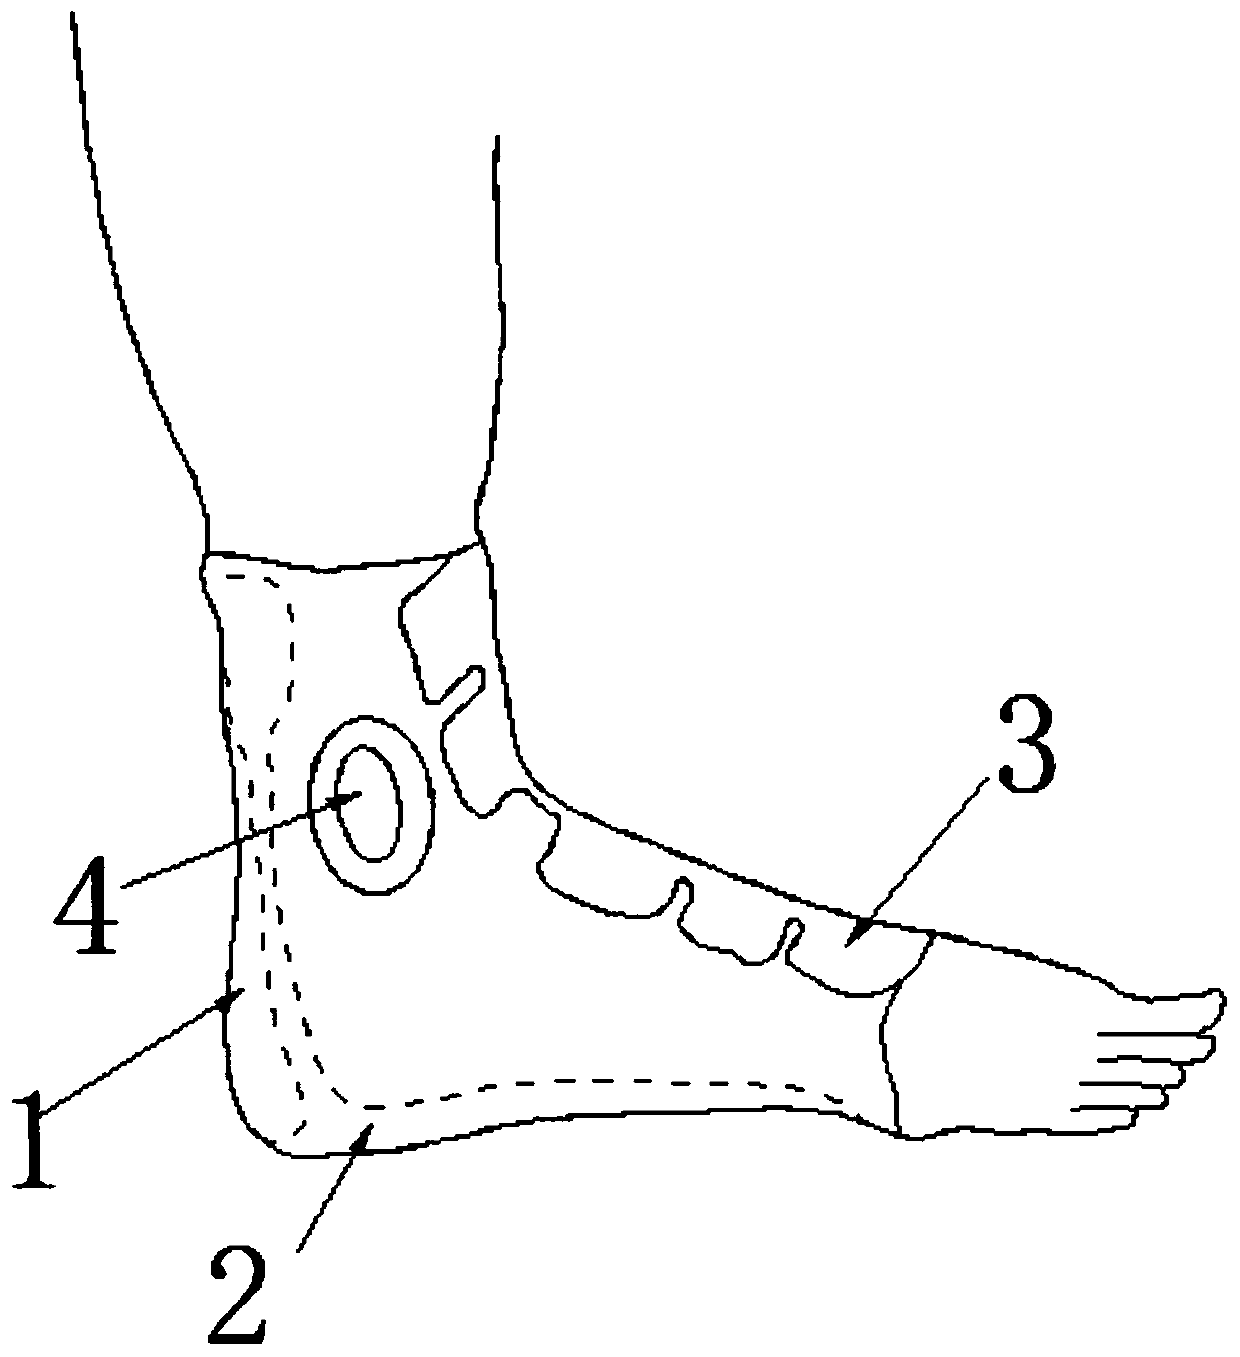 Protective device for foot ankle joint ligament